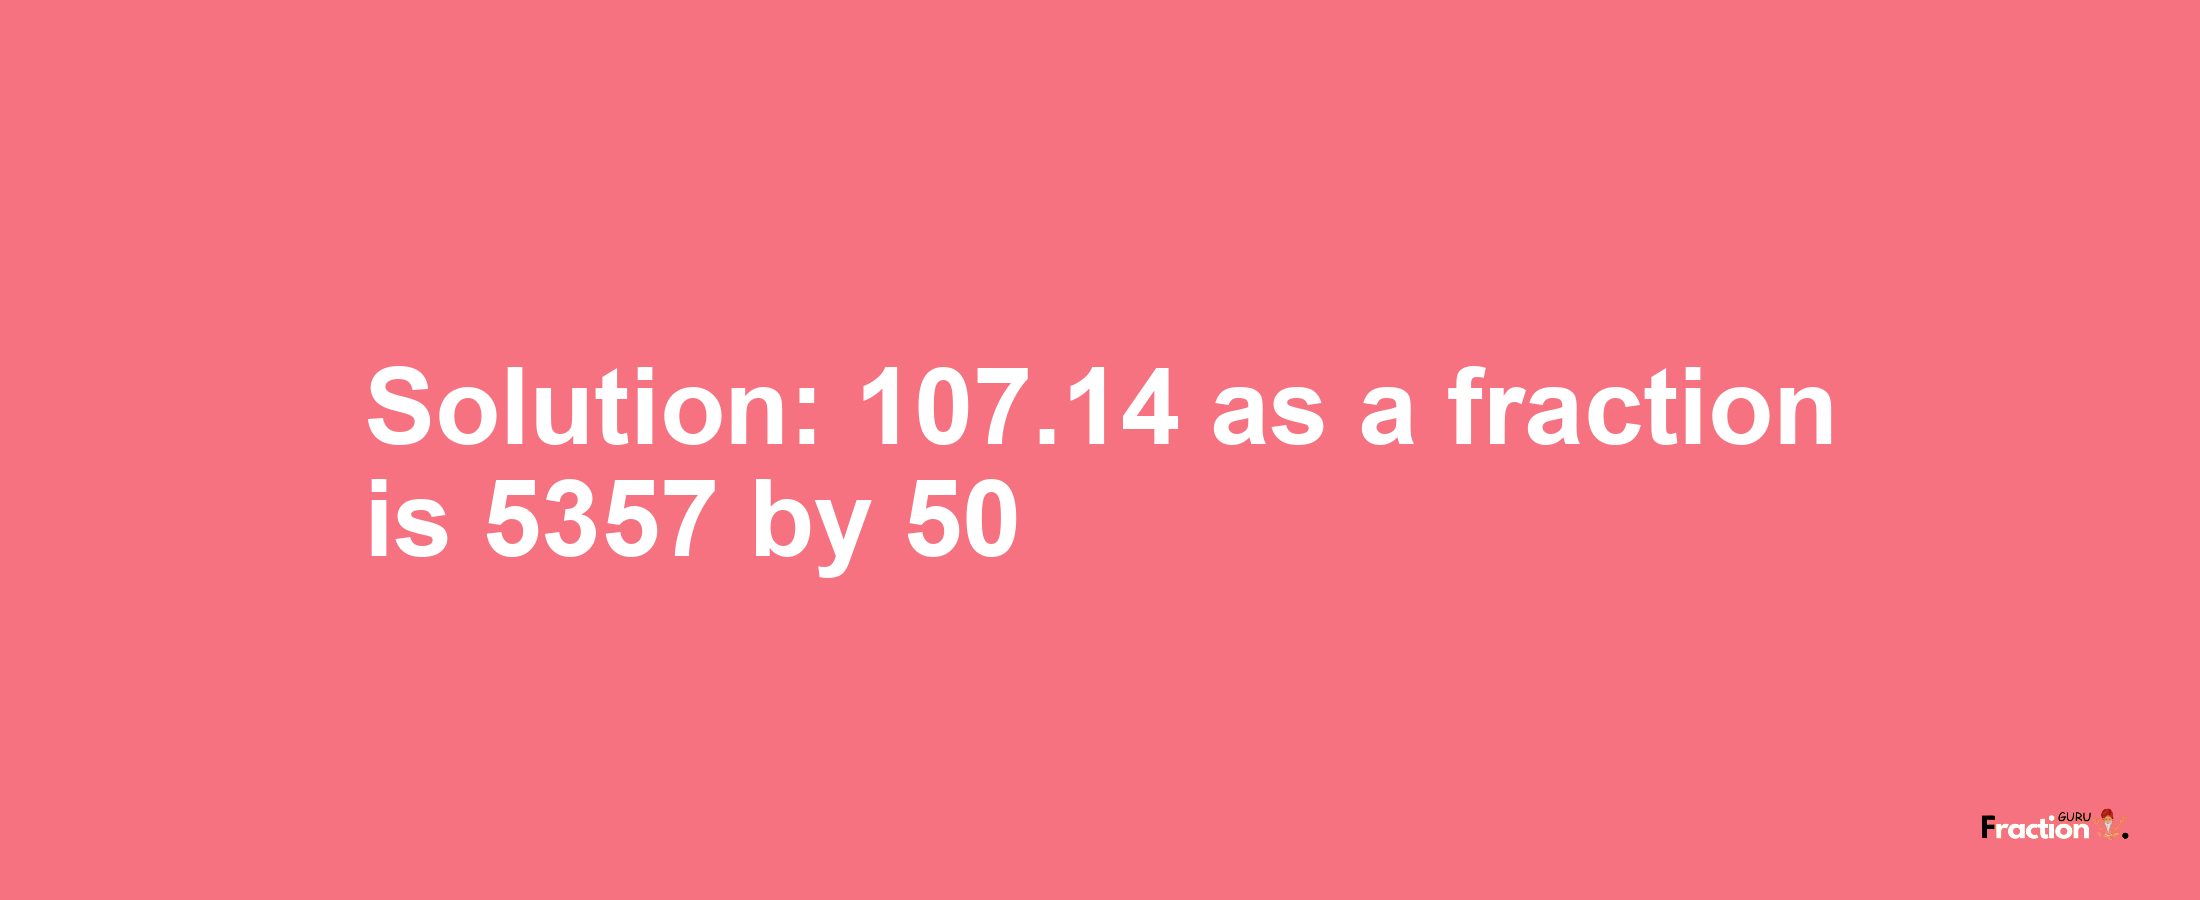 Solution:107.14 as a fraction is 5357/50